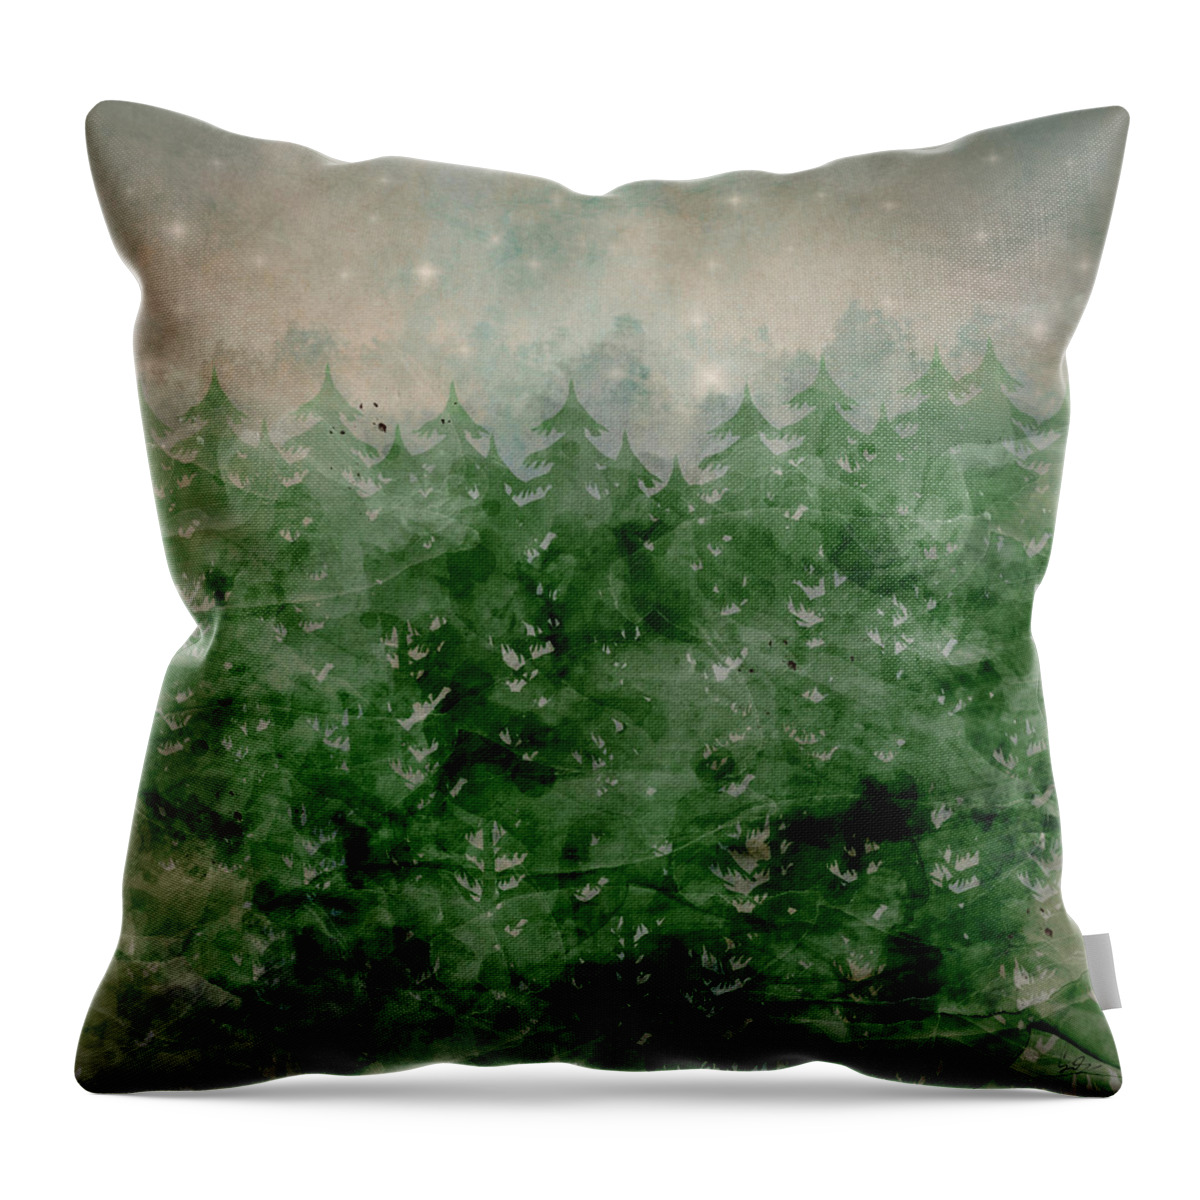 Wilderness Throw Pillow featuring the painting Where Wild Stars Fall by Bri Buckley